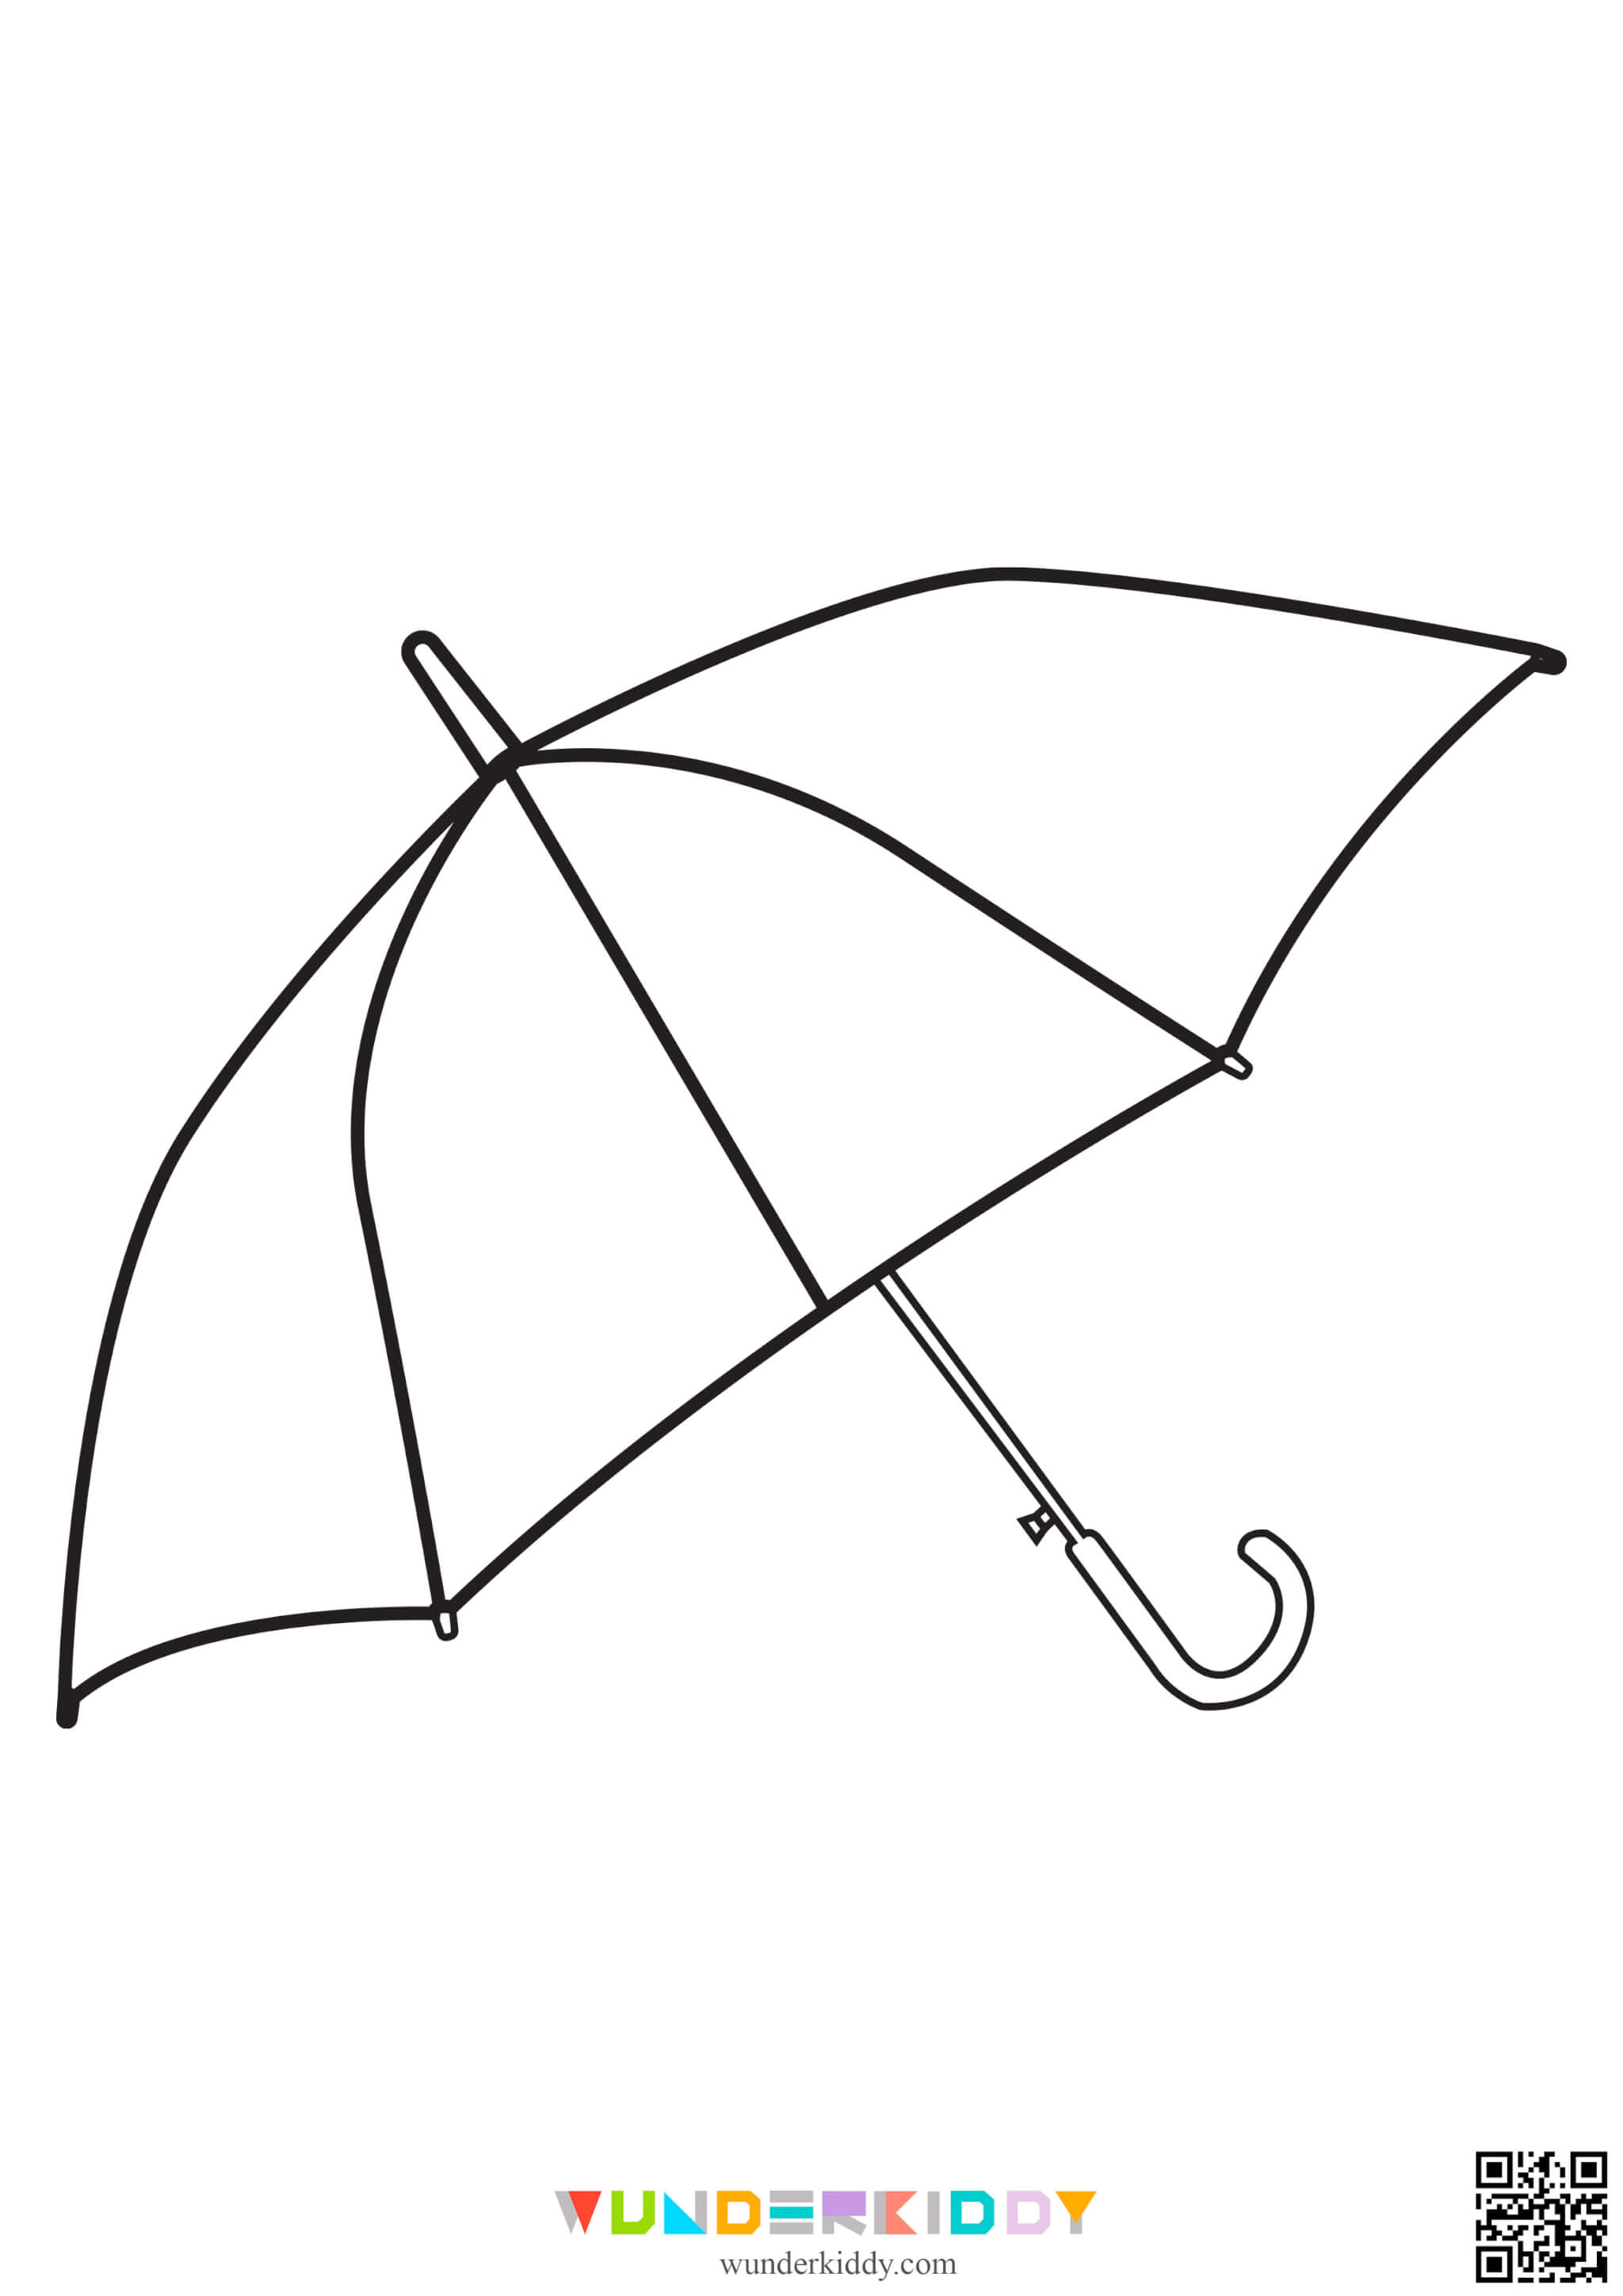 Umbrella Coloring Pages for Kids - Image 6